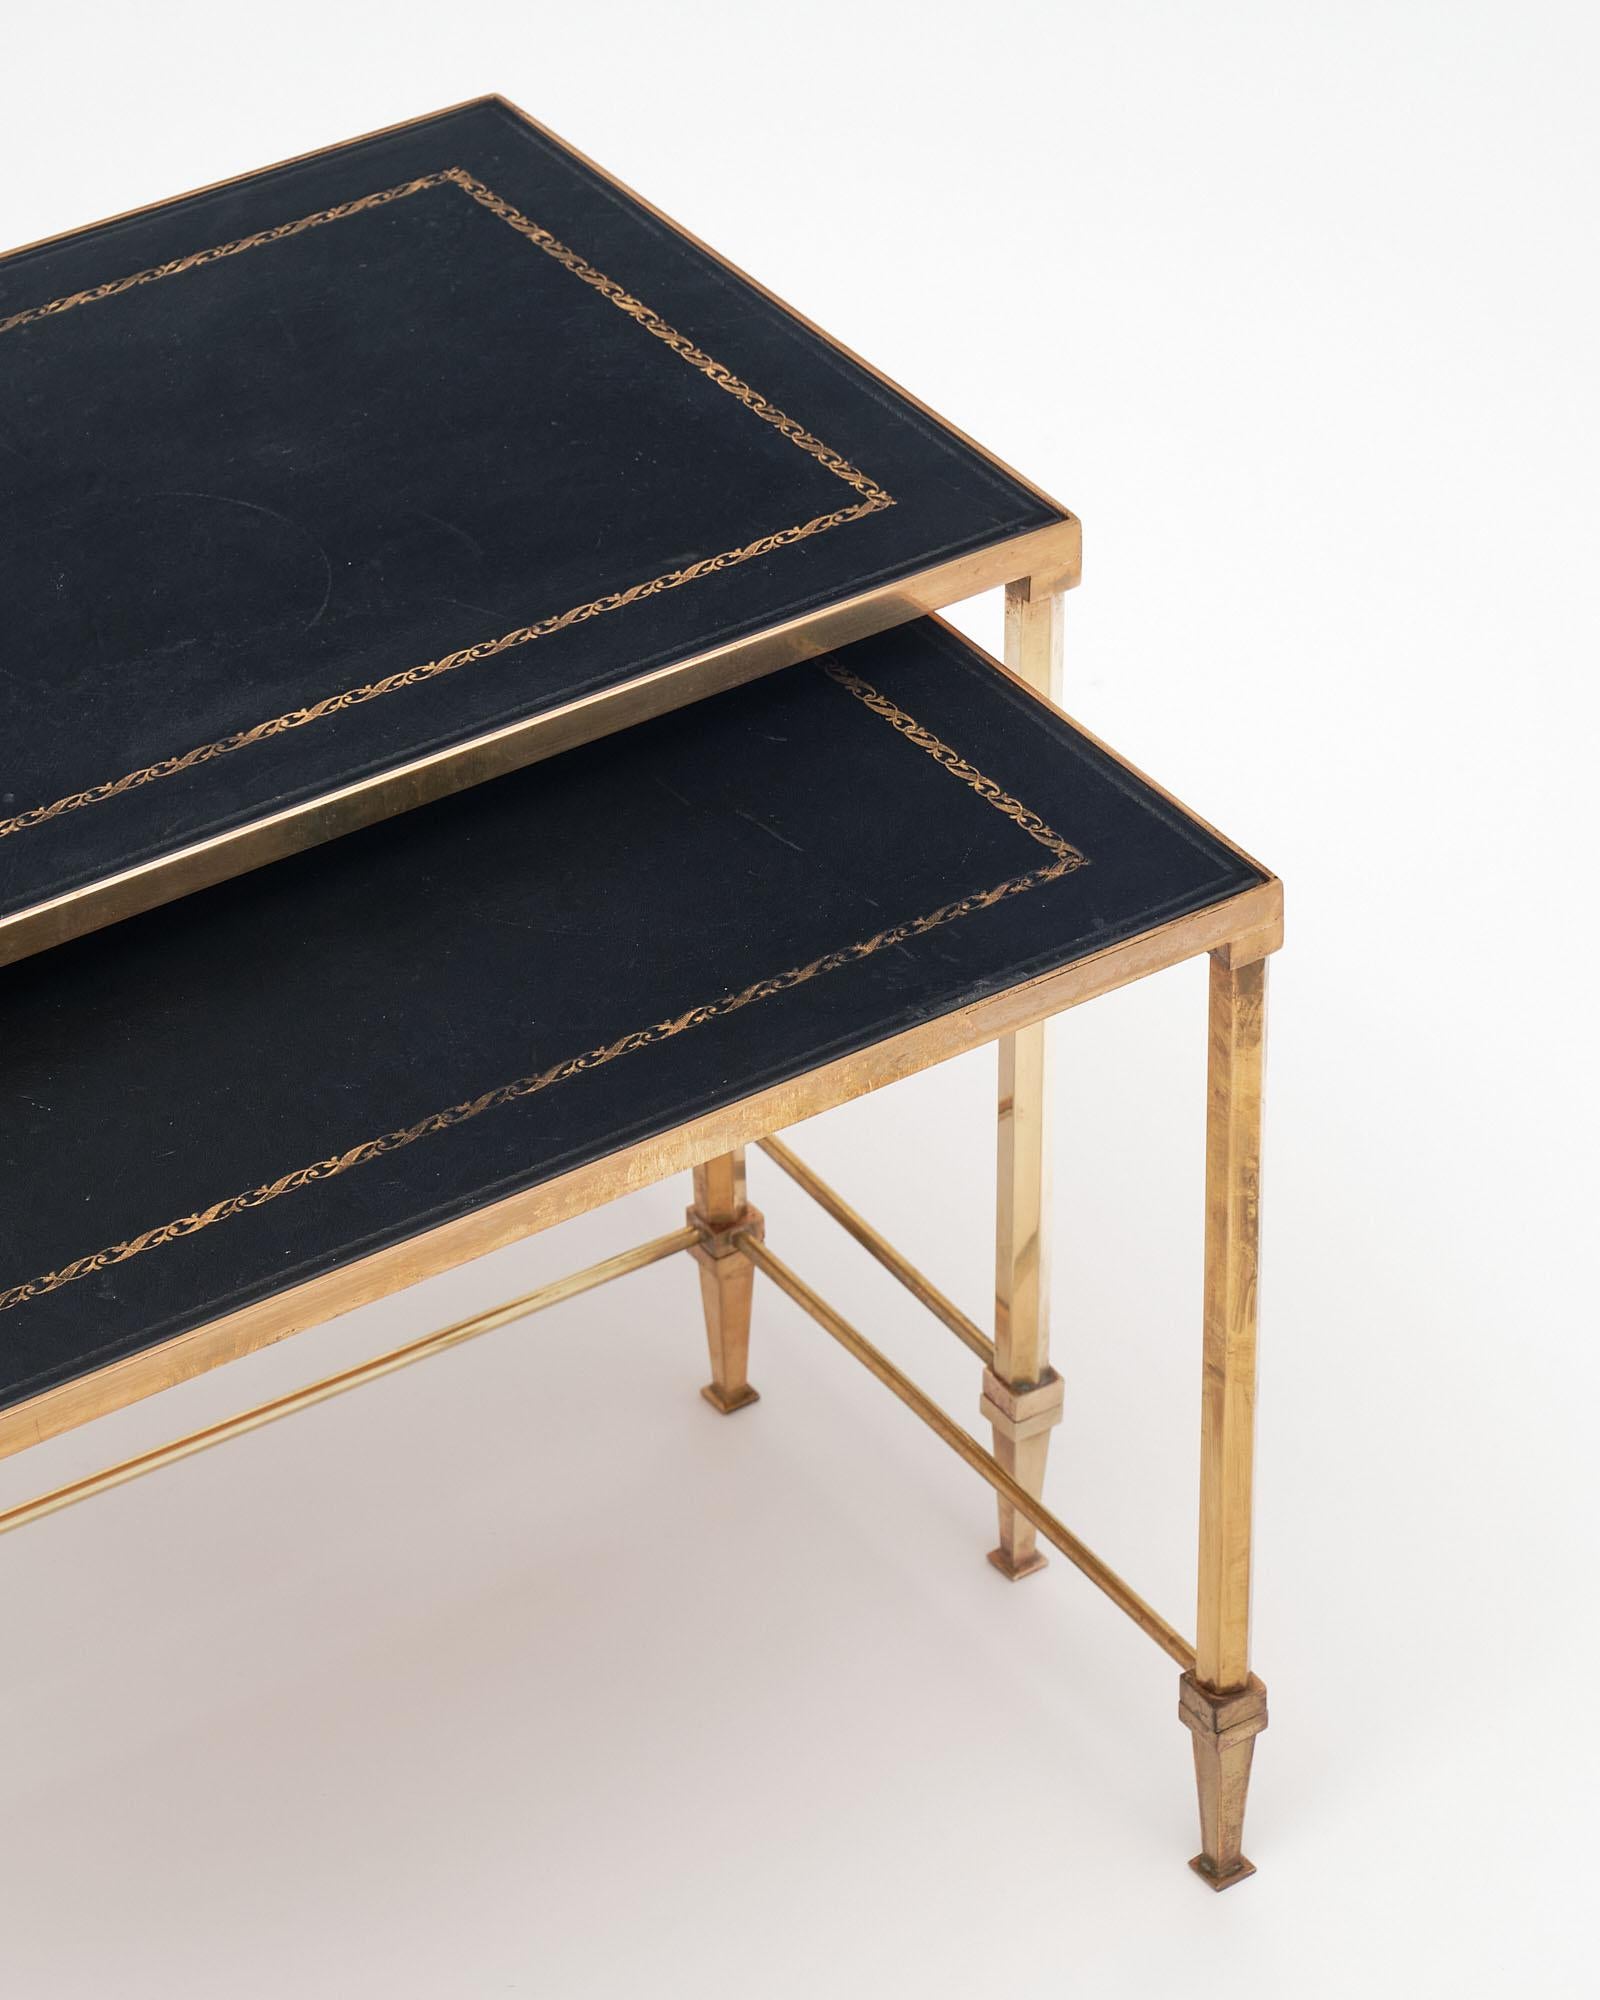 Pair of nesting tables by Maison Jansen. The tops are made of leather with gold detailing supported on gilt brass tapered feet. Dimensions for the smaller table are listed below. 
Measures: L18.5 / D12 / H15.